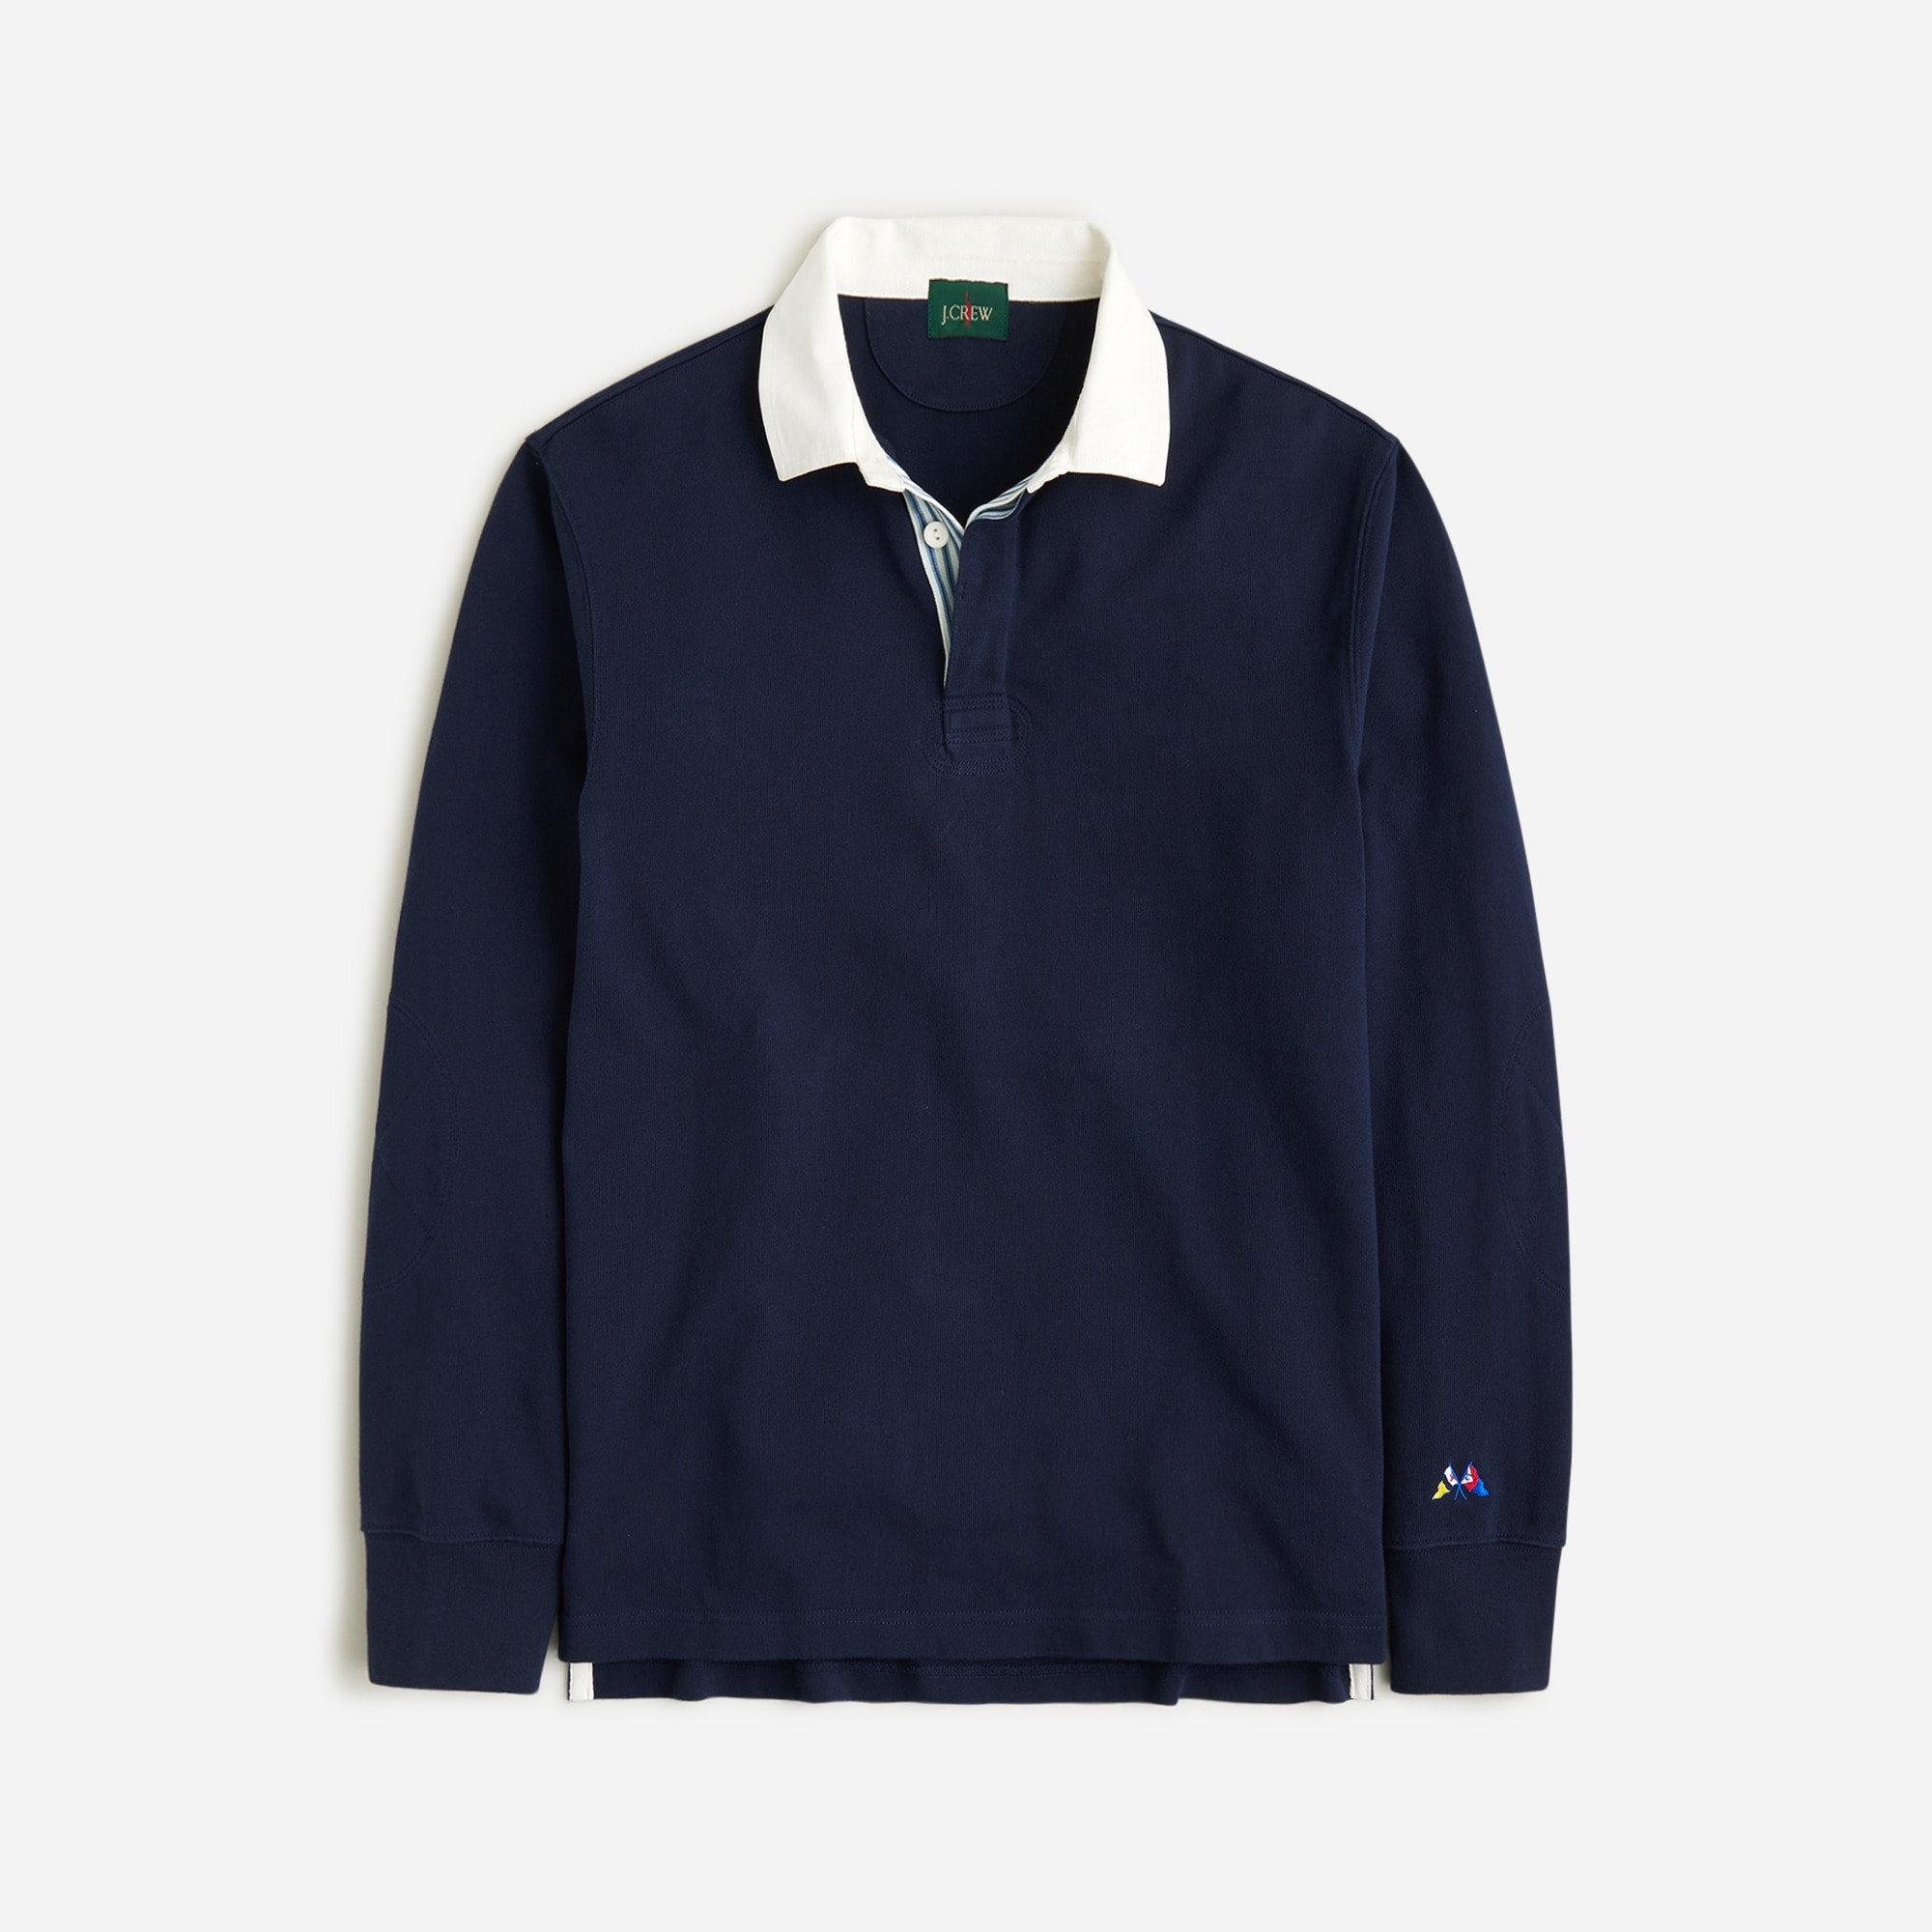 Jcrew Rugby shirt with striped placket